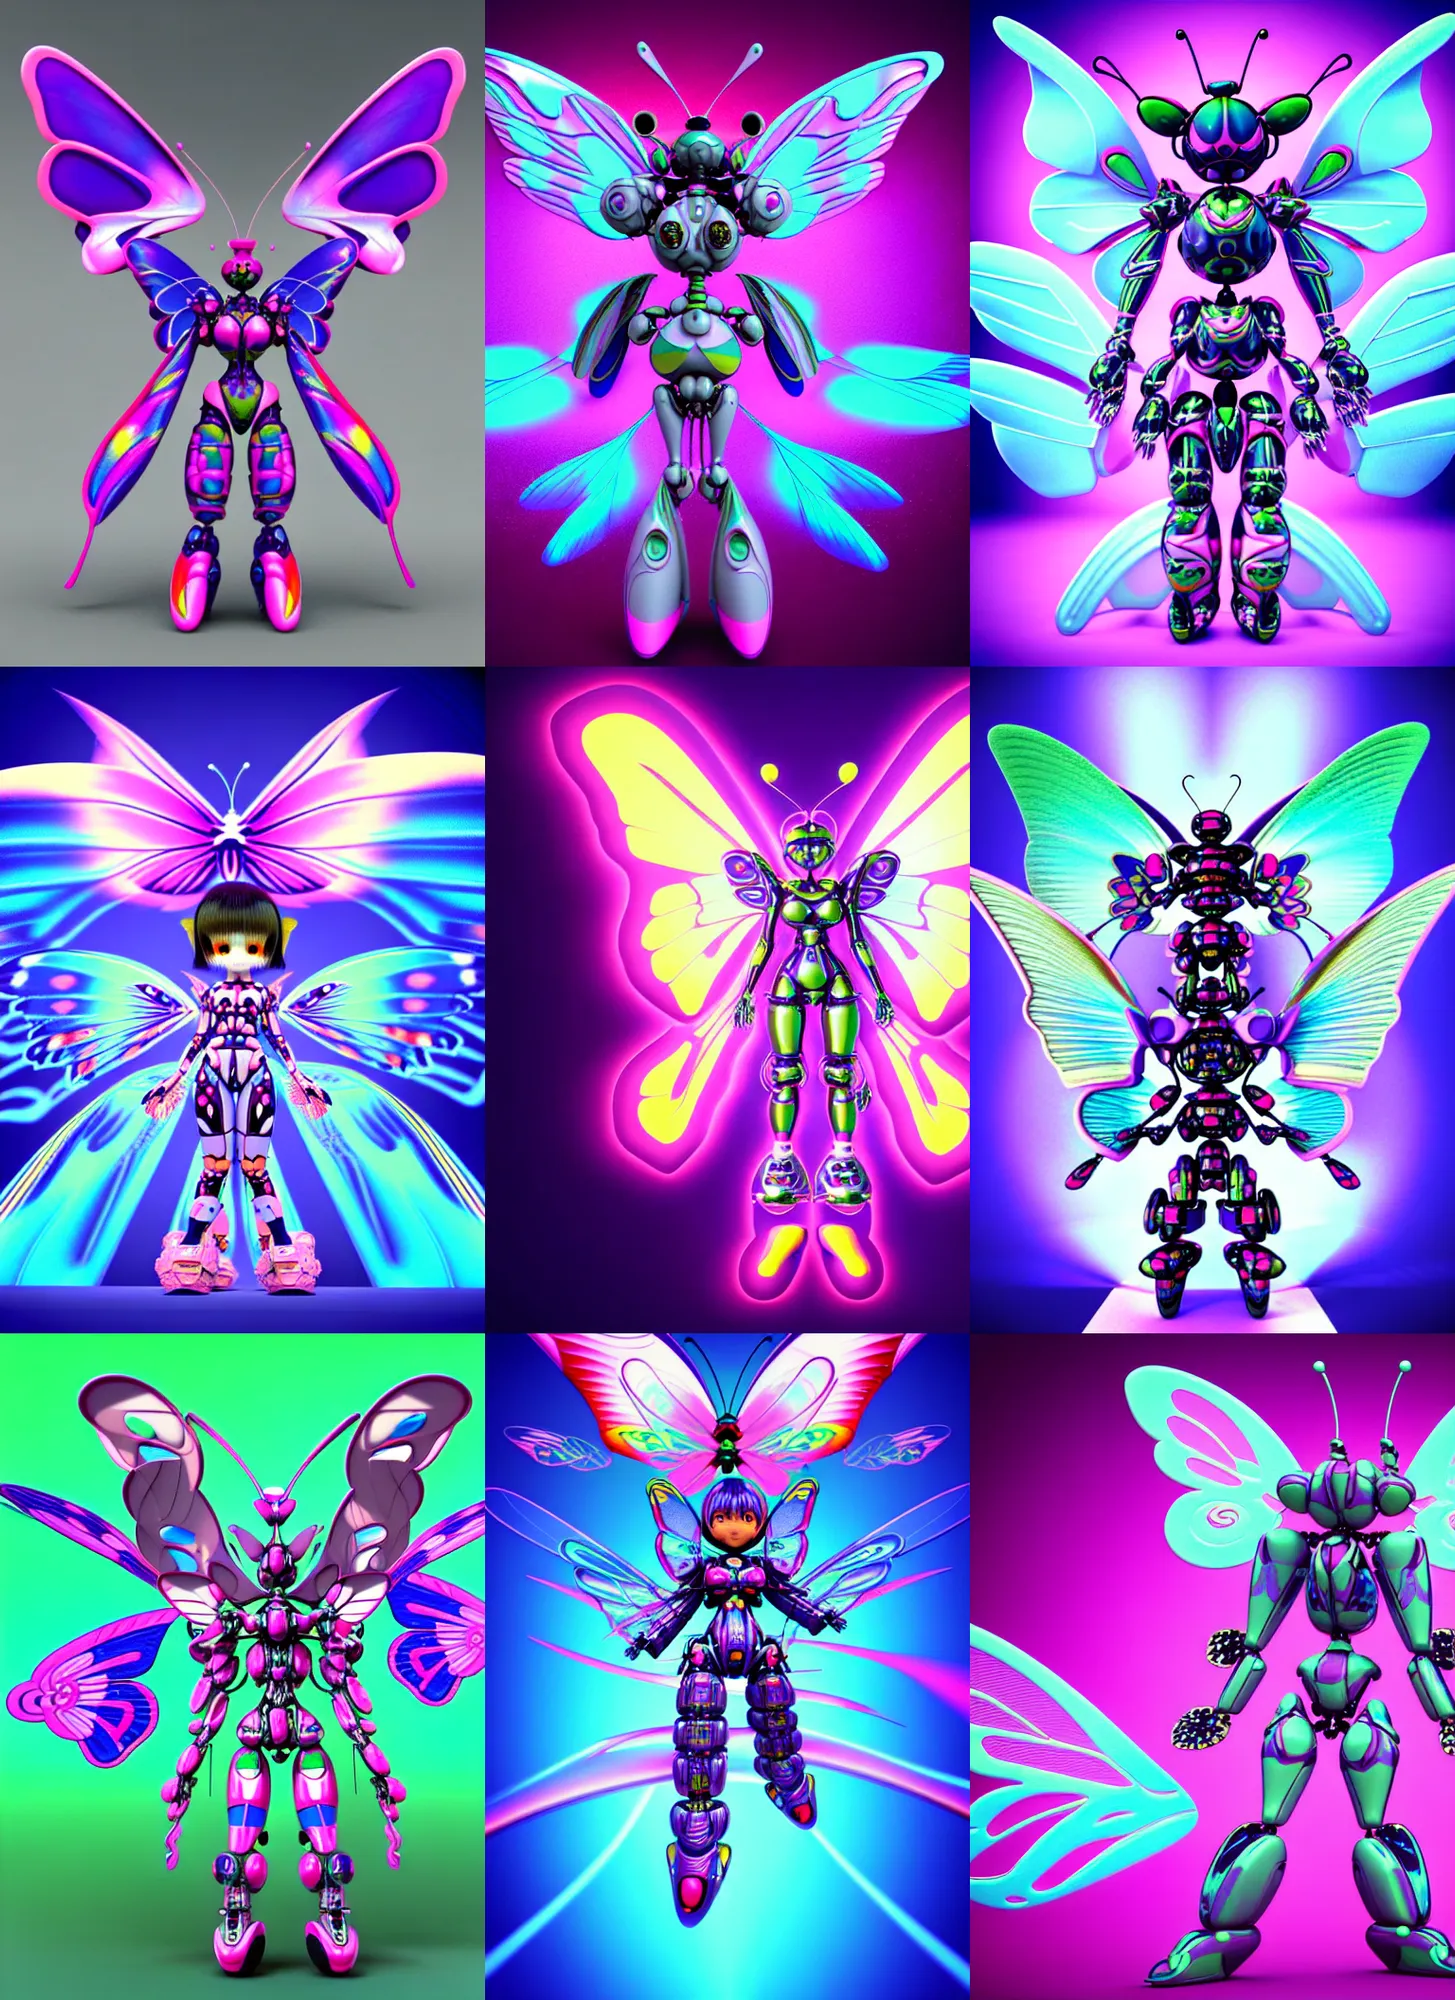 Prompt: 3d rendered chibi butterfly mecha in the style of Ichiro Tanida 3D render wearing angel wings against a psychedelic swirly background with 3d rendered butterflies and 3d rendered flowers n the style of 1990's CG graphics 3d rendered y2K aesthetic by Ichiro Tanida, 3DO magazine